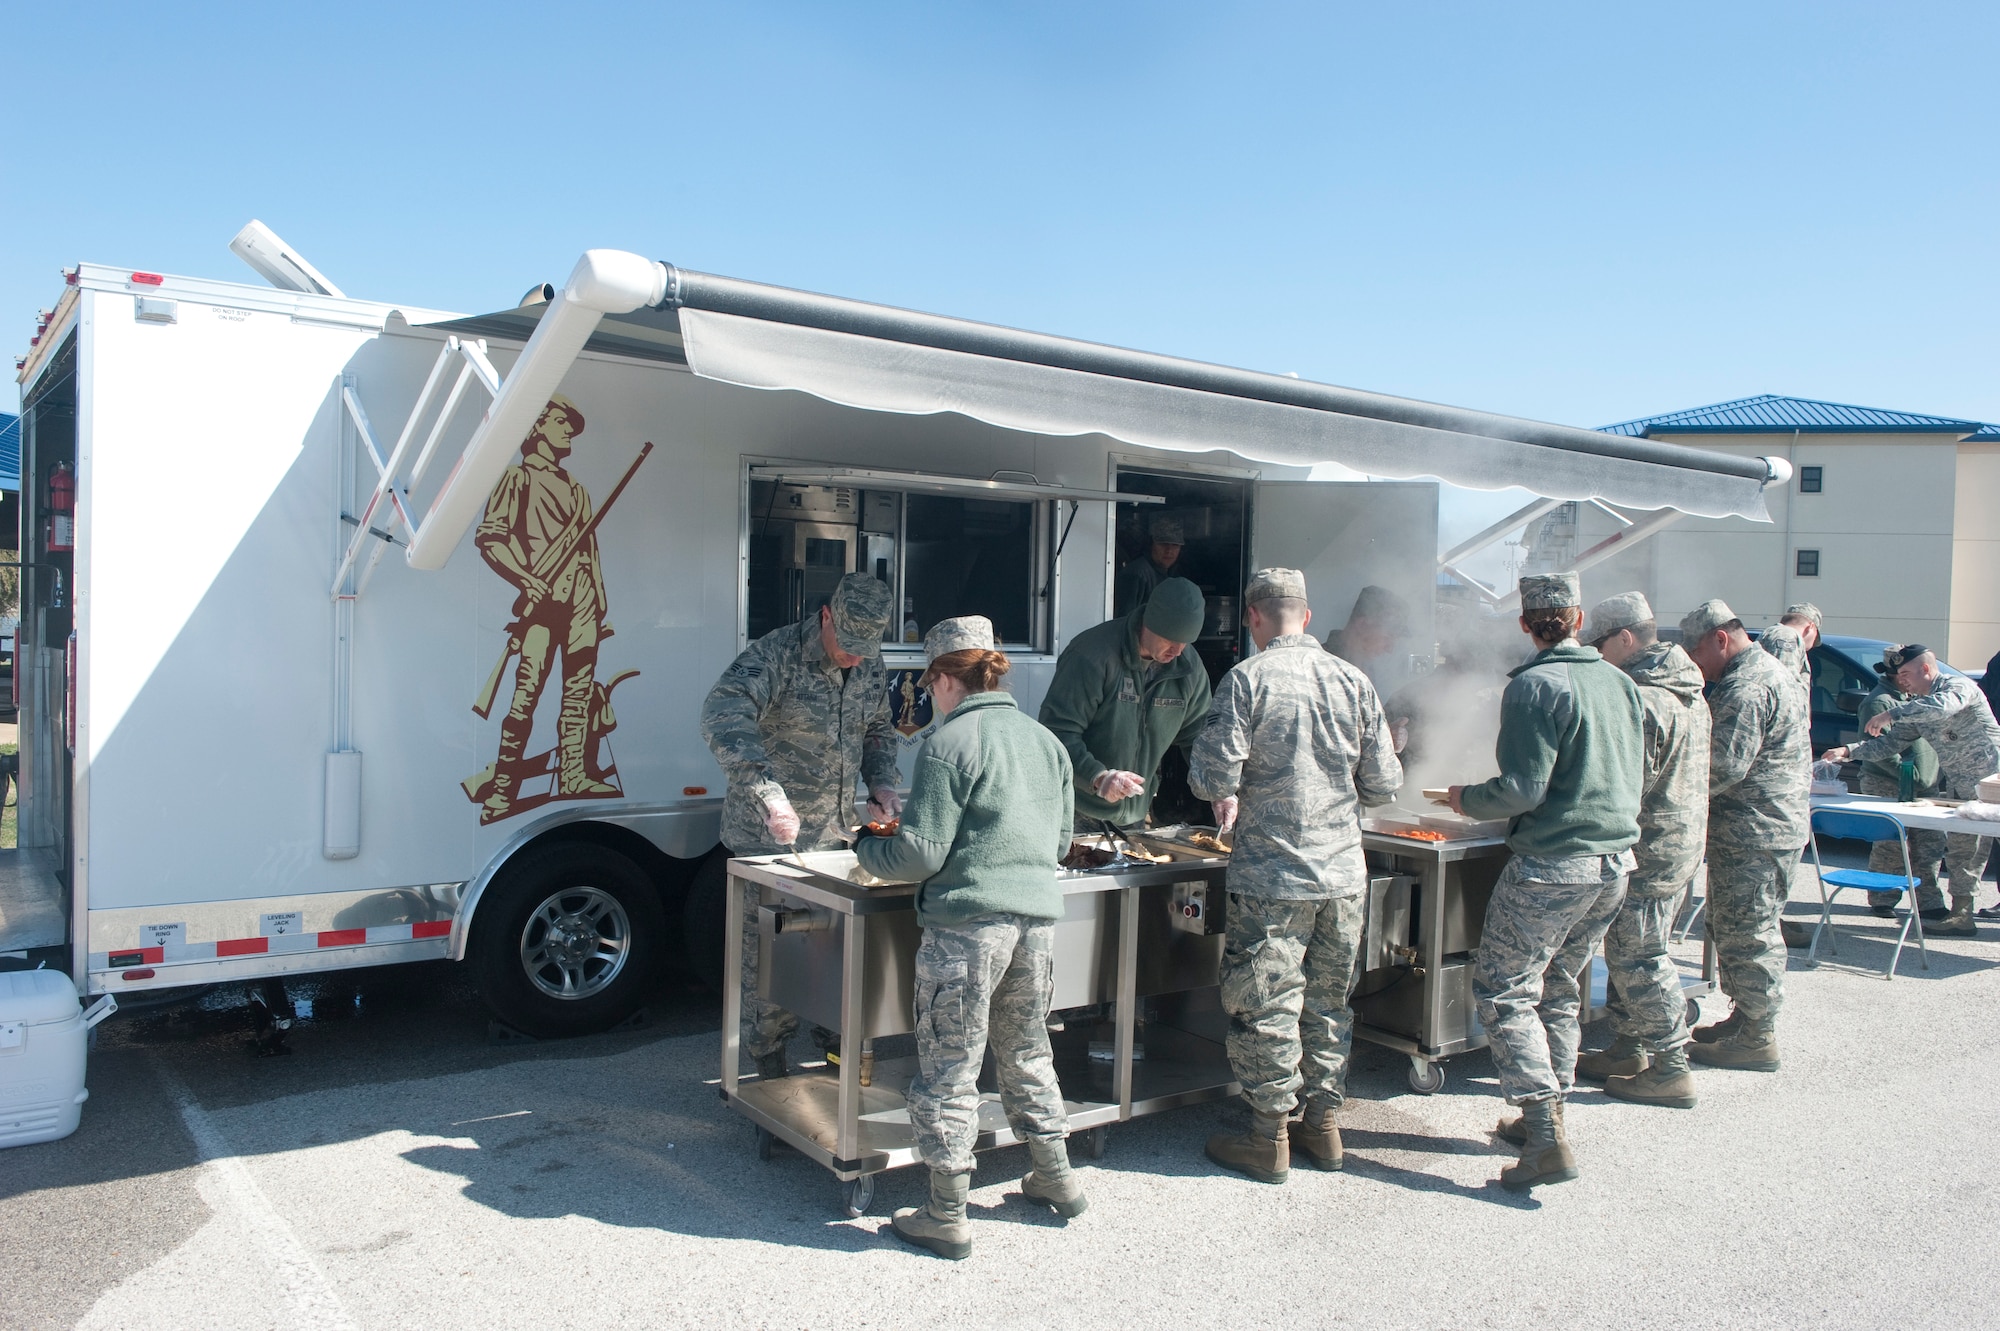 Members of the 136th Force Support Squadron, Services Flight (FSS/FSV), Texas Air National Guard, serve hot meals to Guardsmen during a unit training assembly while demonstrating the functionality of a newly assigned Deployable Ready Mobile Kitchen Trailer (DRMKT) to members of the 116th Force Support Squadron, Services Flight, Georgia Air National Guard, Robins Air Force Base, at Naval Air Station Fort Worth Joint Reserve Base, Texas, Feb. 23, 2014. Members of the 116th FSS/FSV participated in a two-day training event in anticipation of receiving their own DRMKT in July 2014. (U.S. Air National Guard photos by Master Sgt. Charles Hatton/Released)